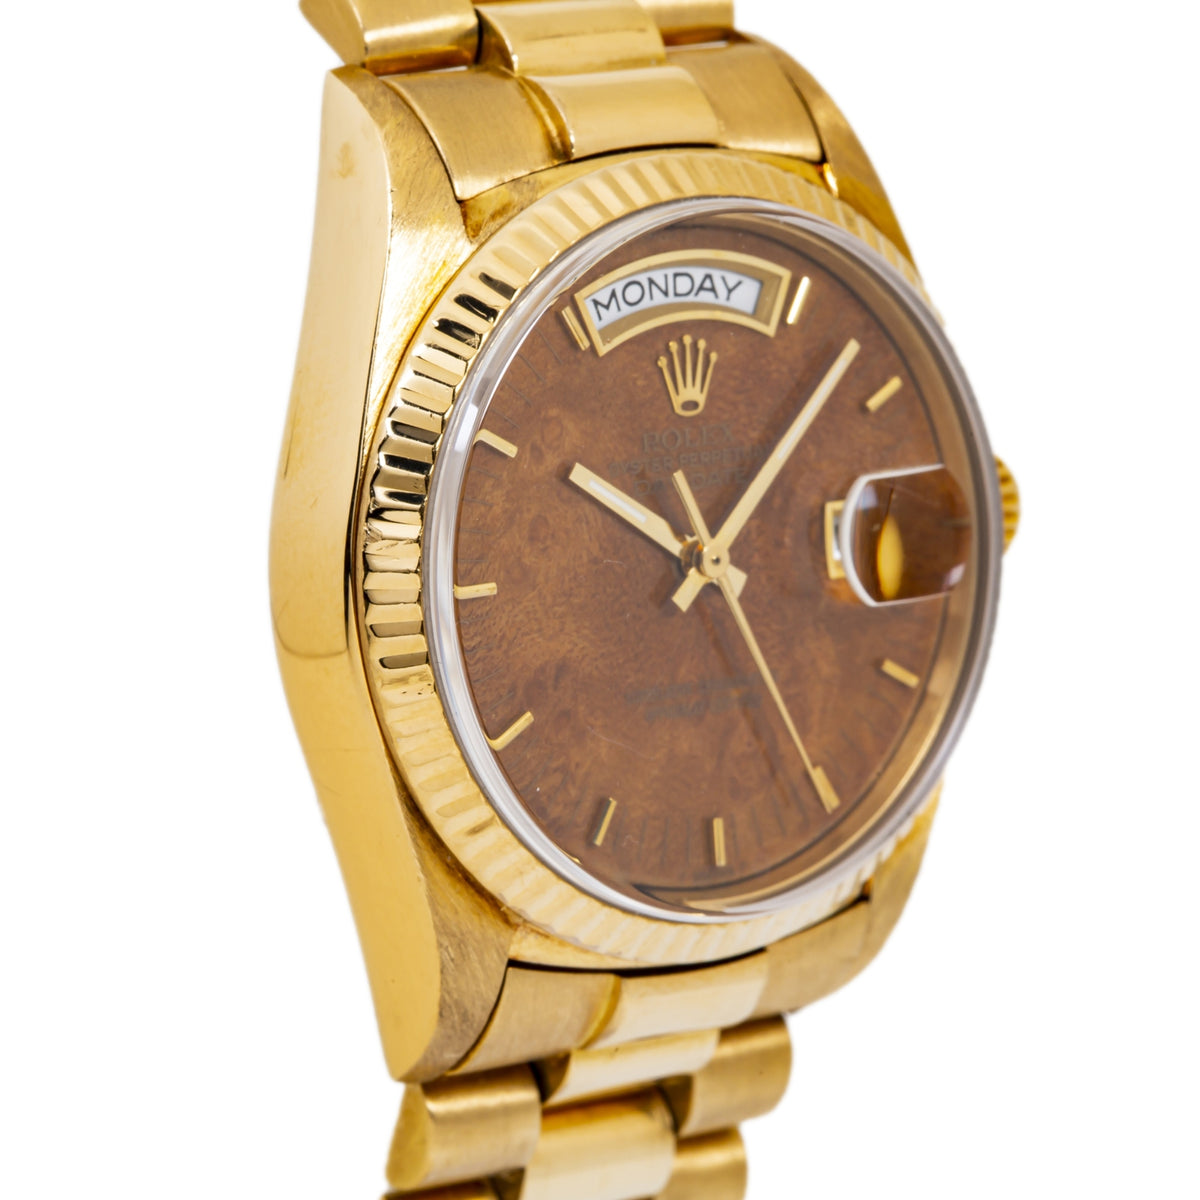 Rolex President Day-Date 18038 18K Yellow Gold Wood Dial Automatic Watch 36mm